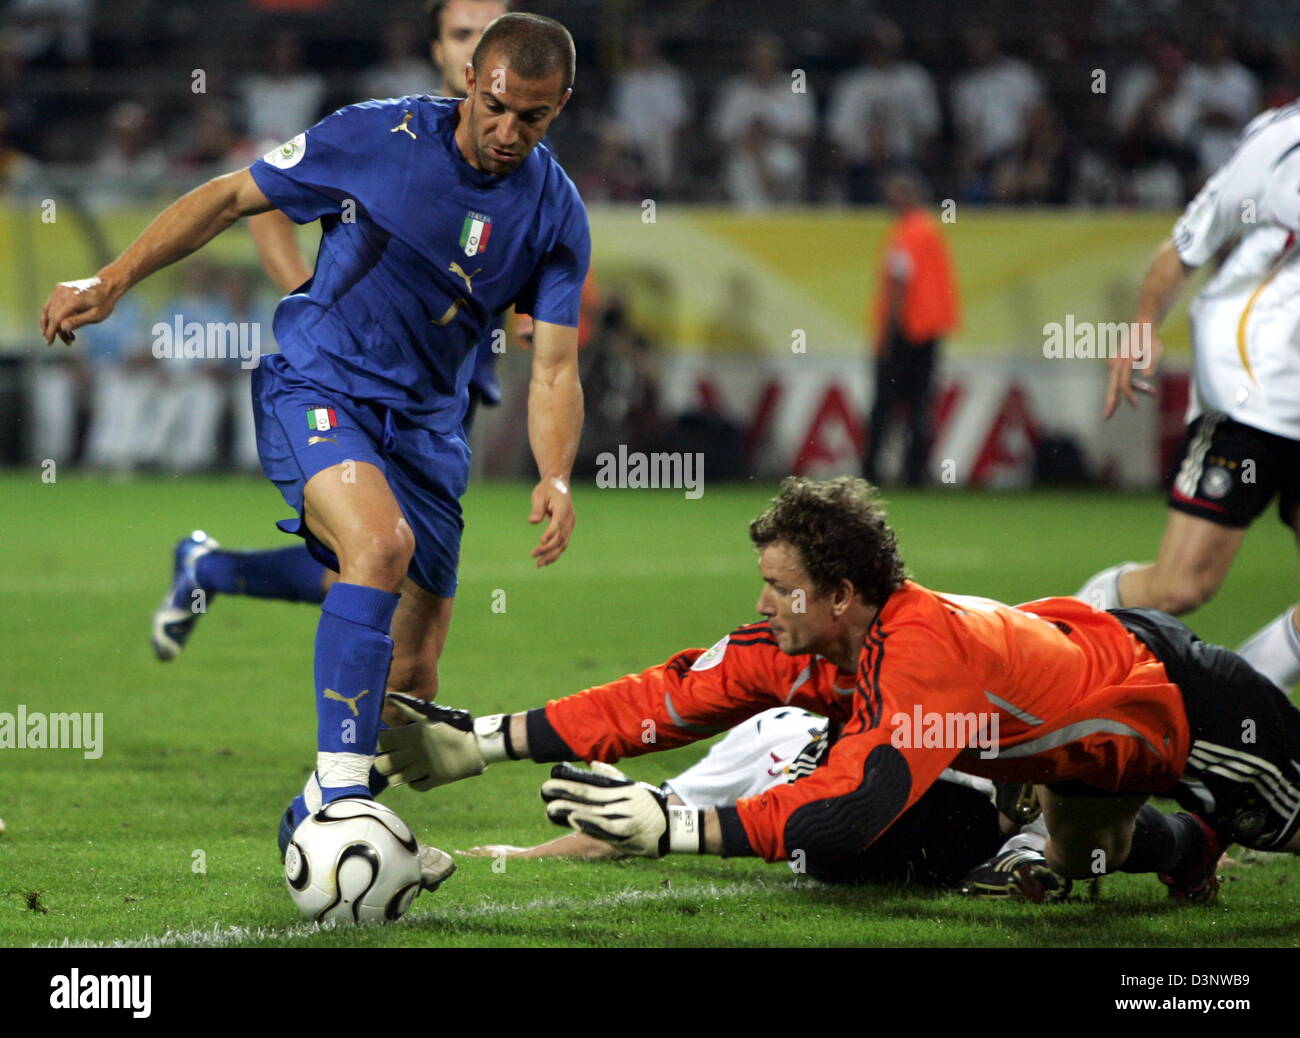 Goal keeper Jens Lehmann (R) from Germany vies with Alessandro del Piero from Italy during extra time of the semi-final of the 2006 FIFA World Cup between Germany and Italy in Dortmund, Germany, Tuesday, 04 July 2006. DPA/ROLAND WEIHRAUCH +++ Mobile Services OUT +++ Please refer to FIFA's terms and conditions Stock Photo